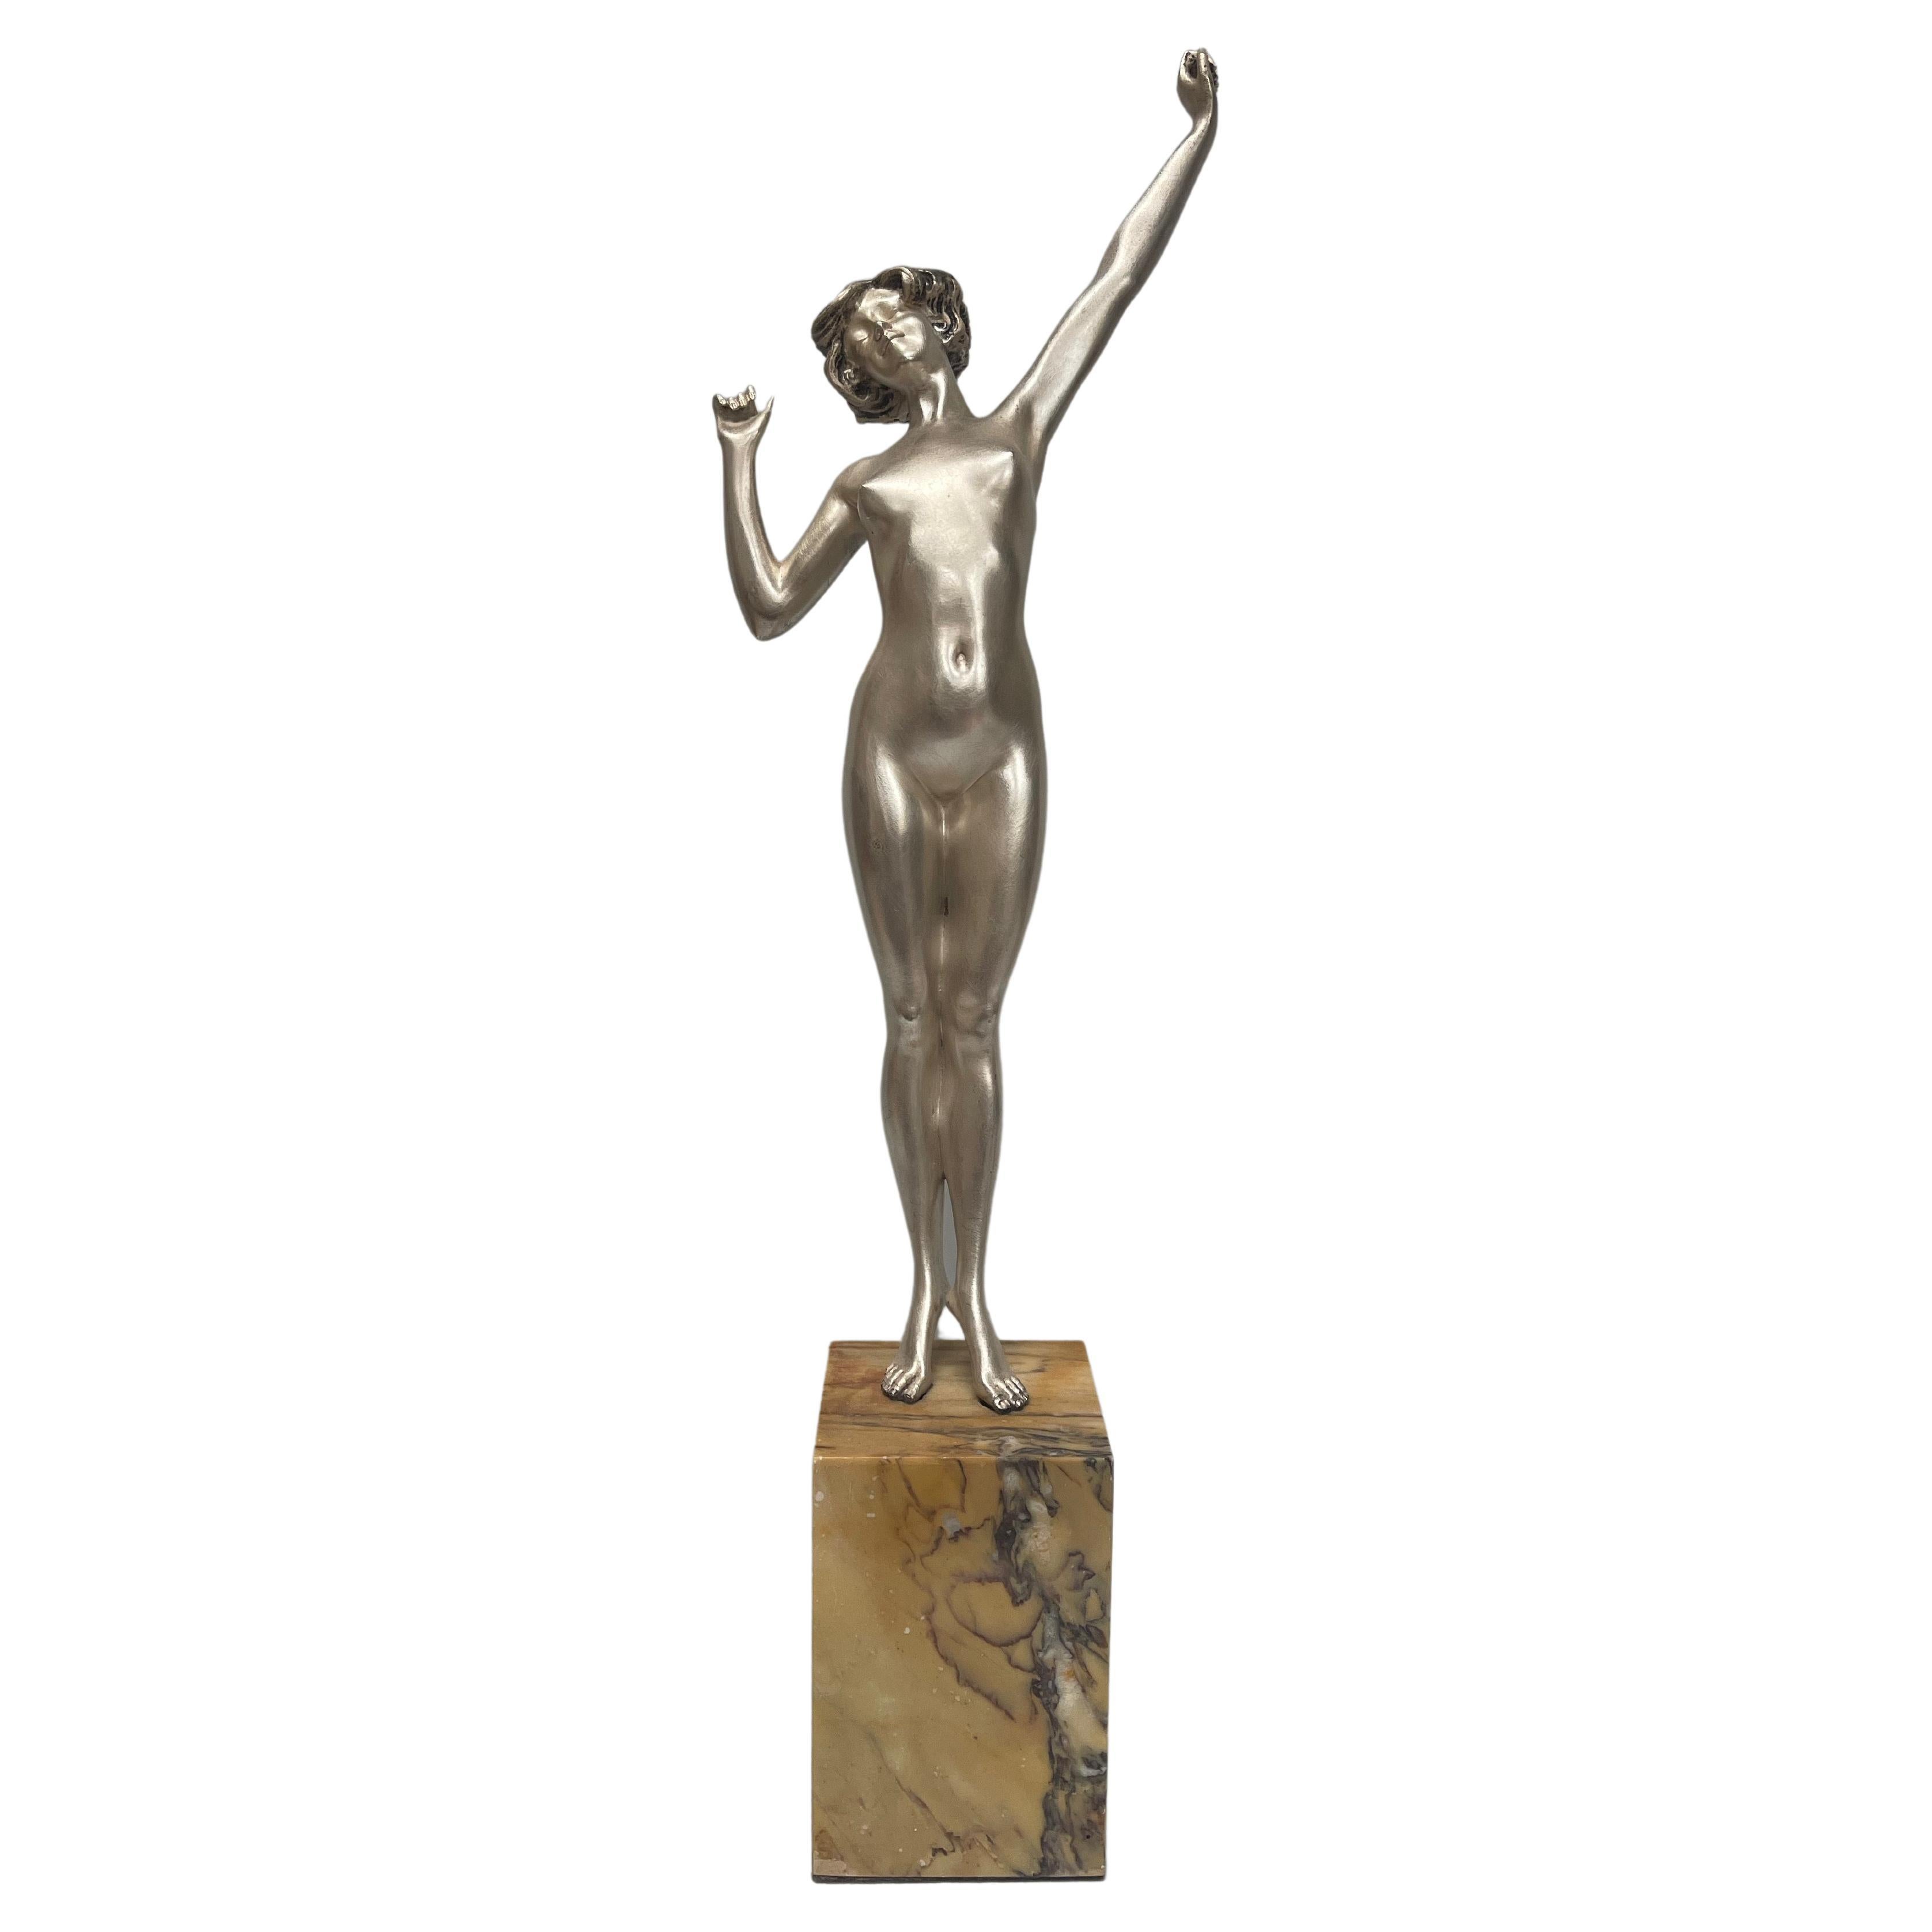 Awakening Art Deco Sculpture by Paul Philippe For Sale